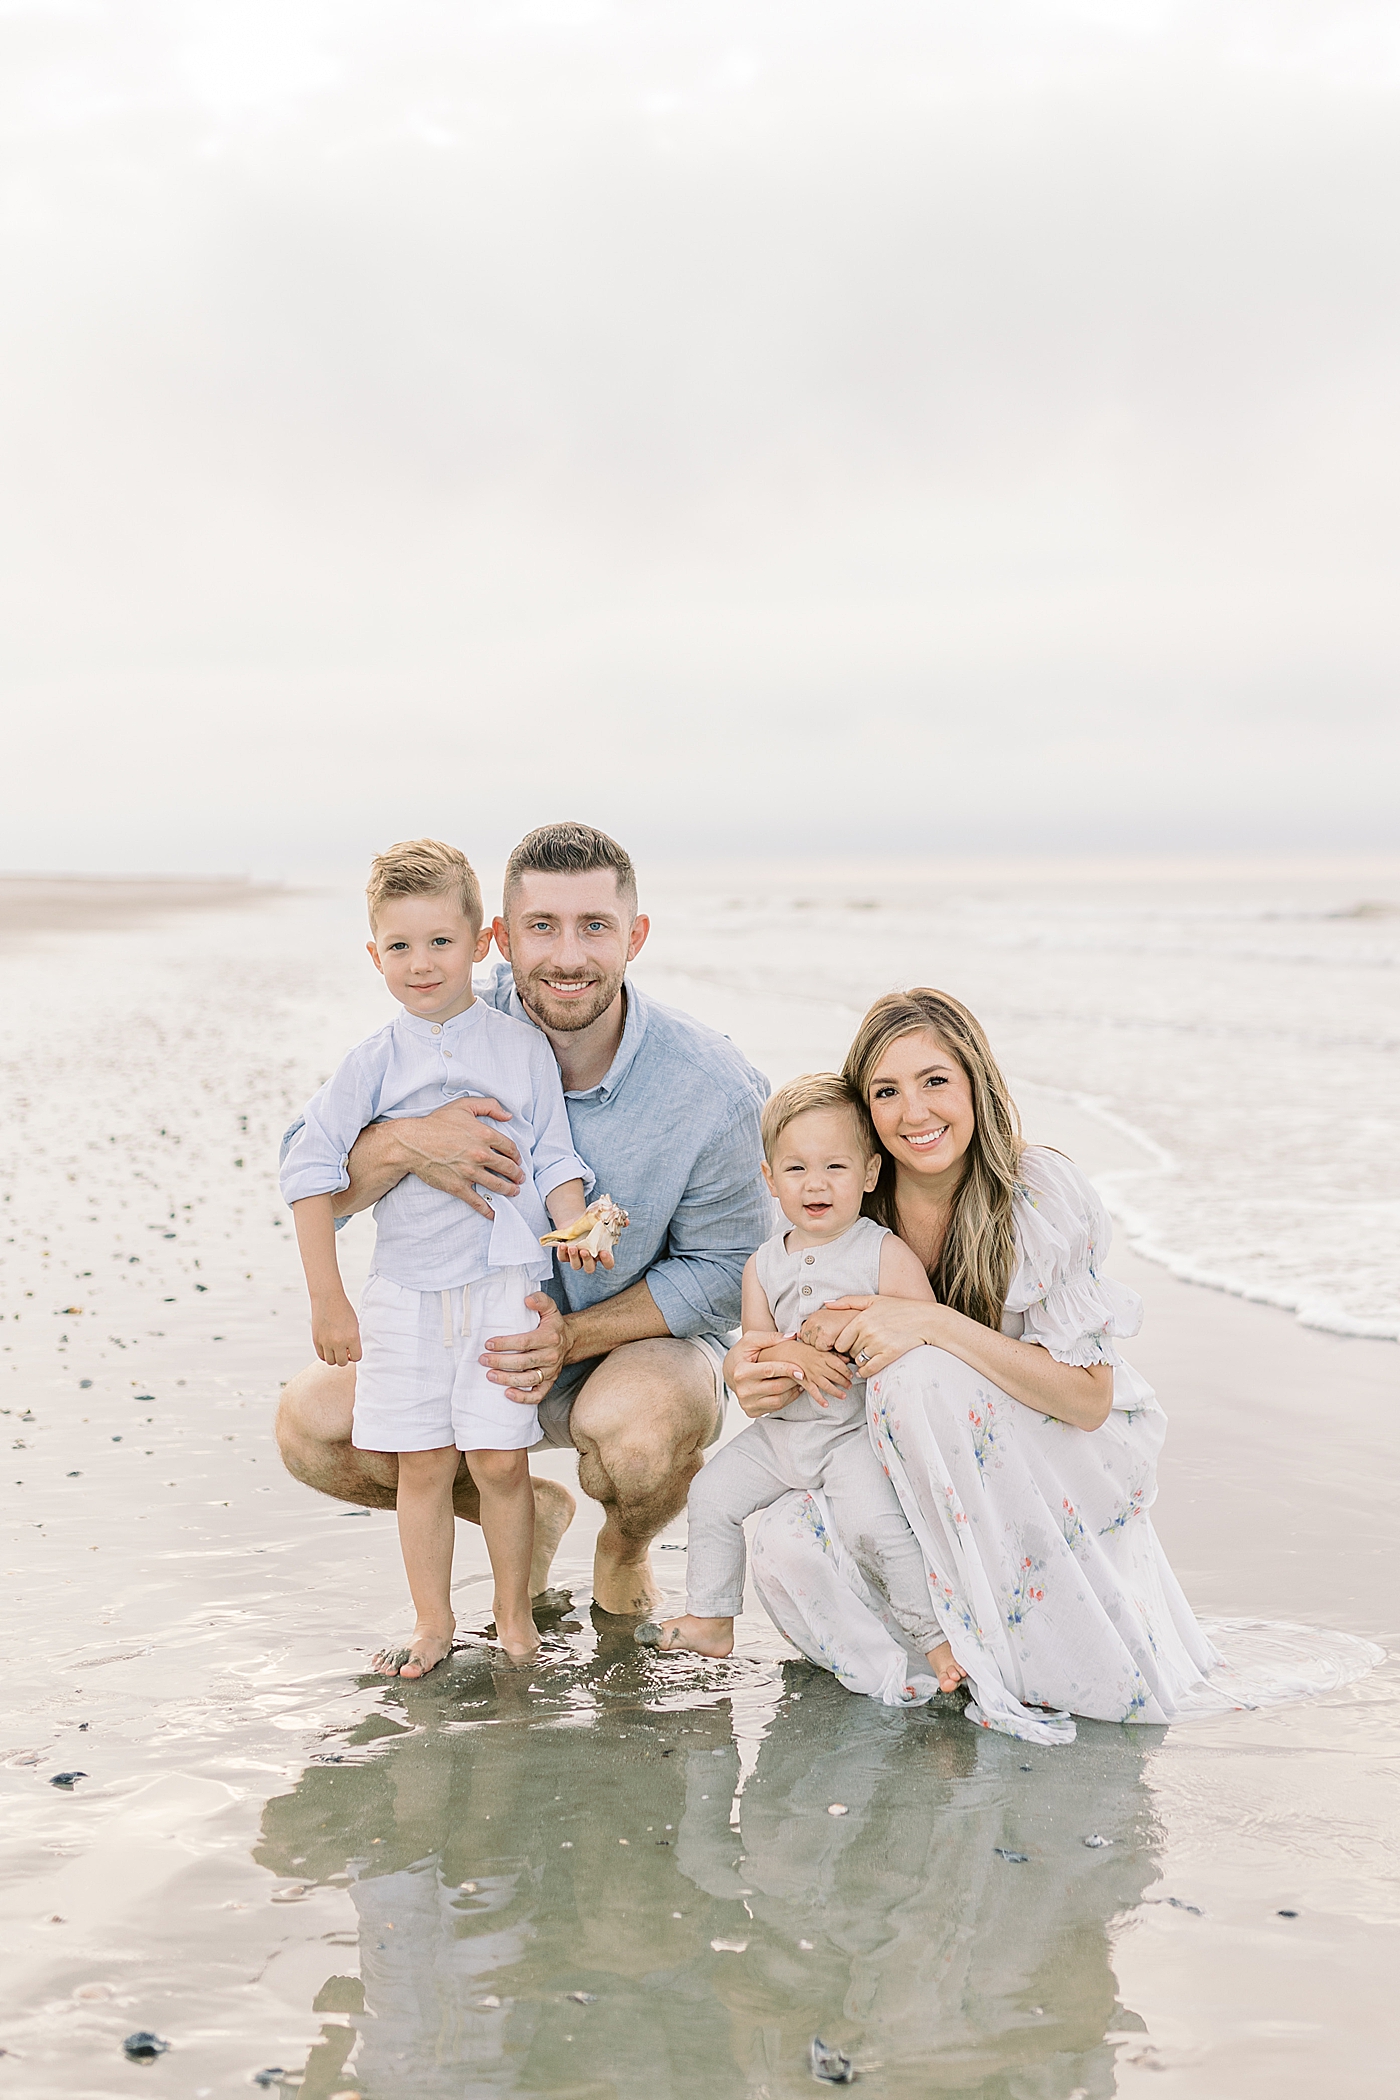 Family of four snuggling near the ocean | Preparing for Family Beach Session with Caitlyn Motycka